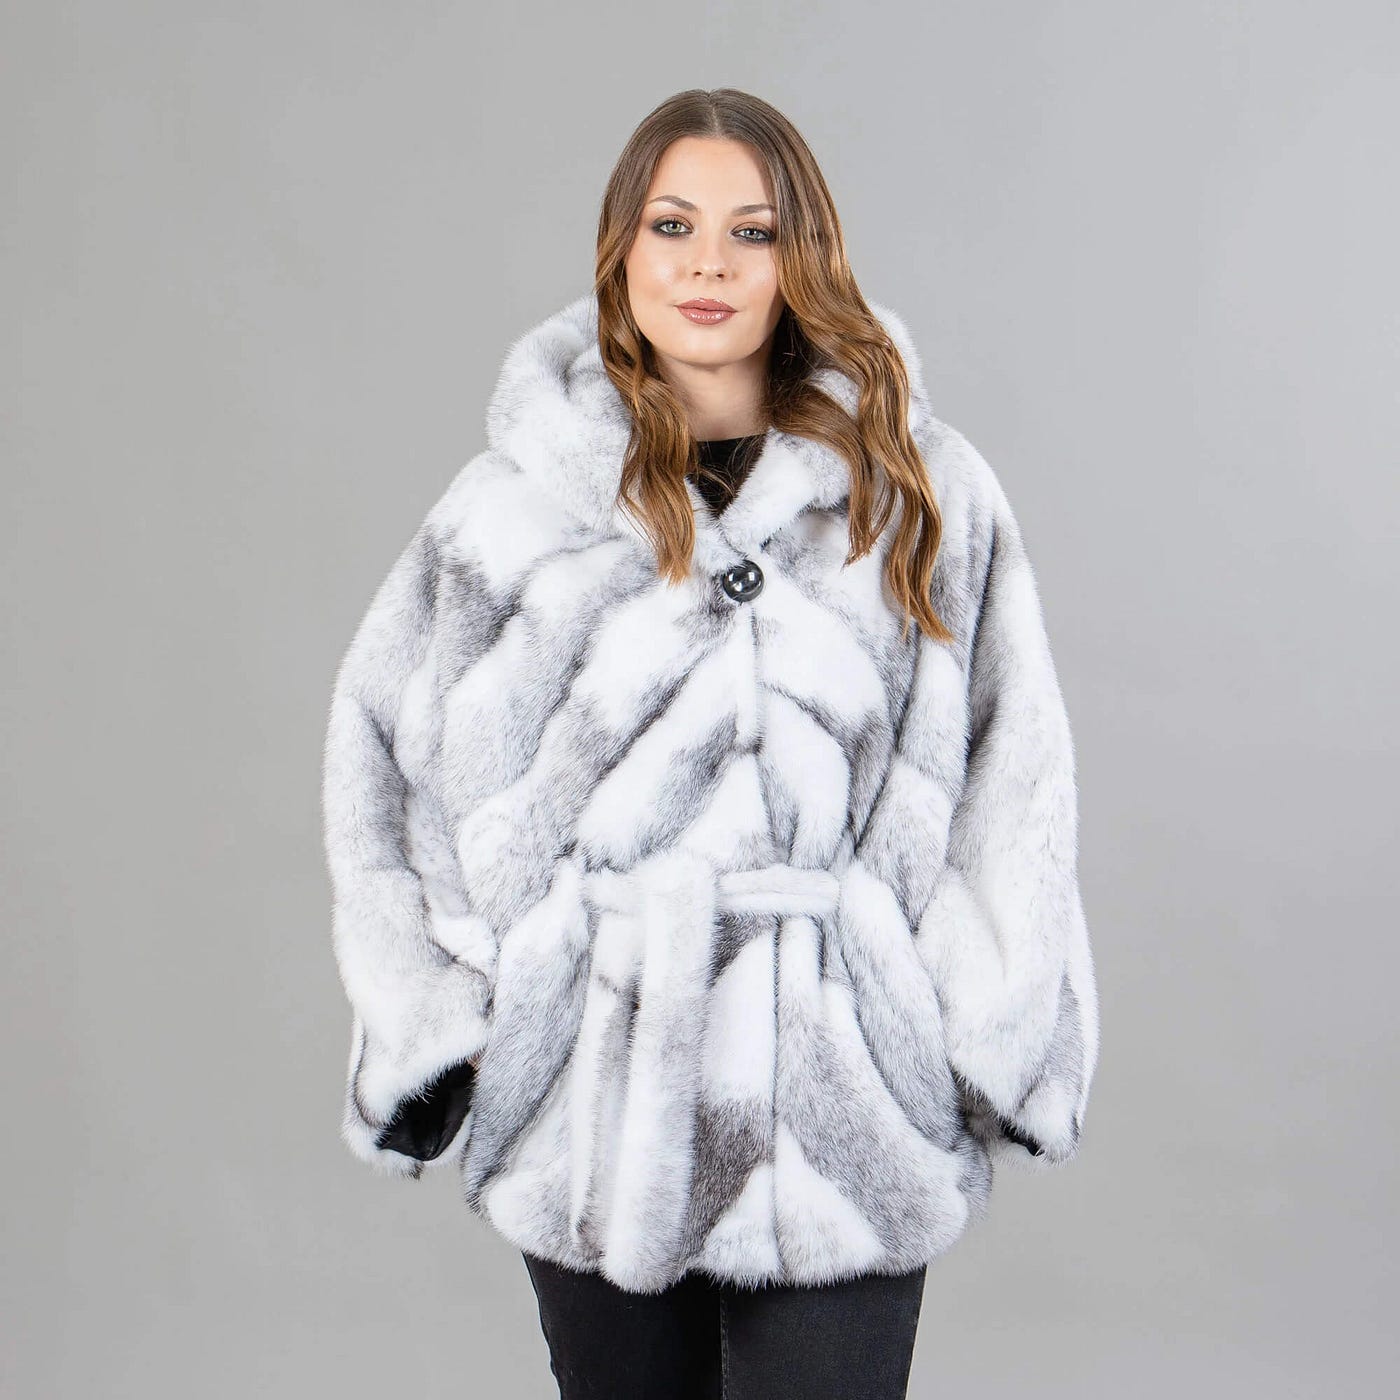 How to tell if a fur coat is real - eFurs